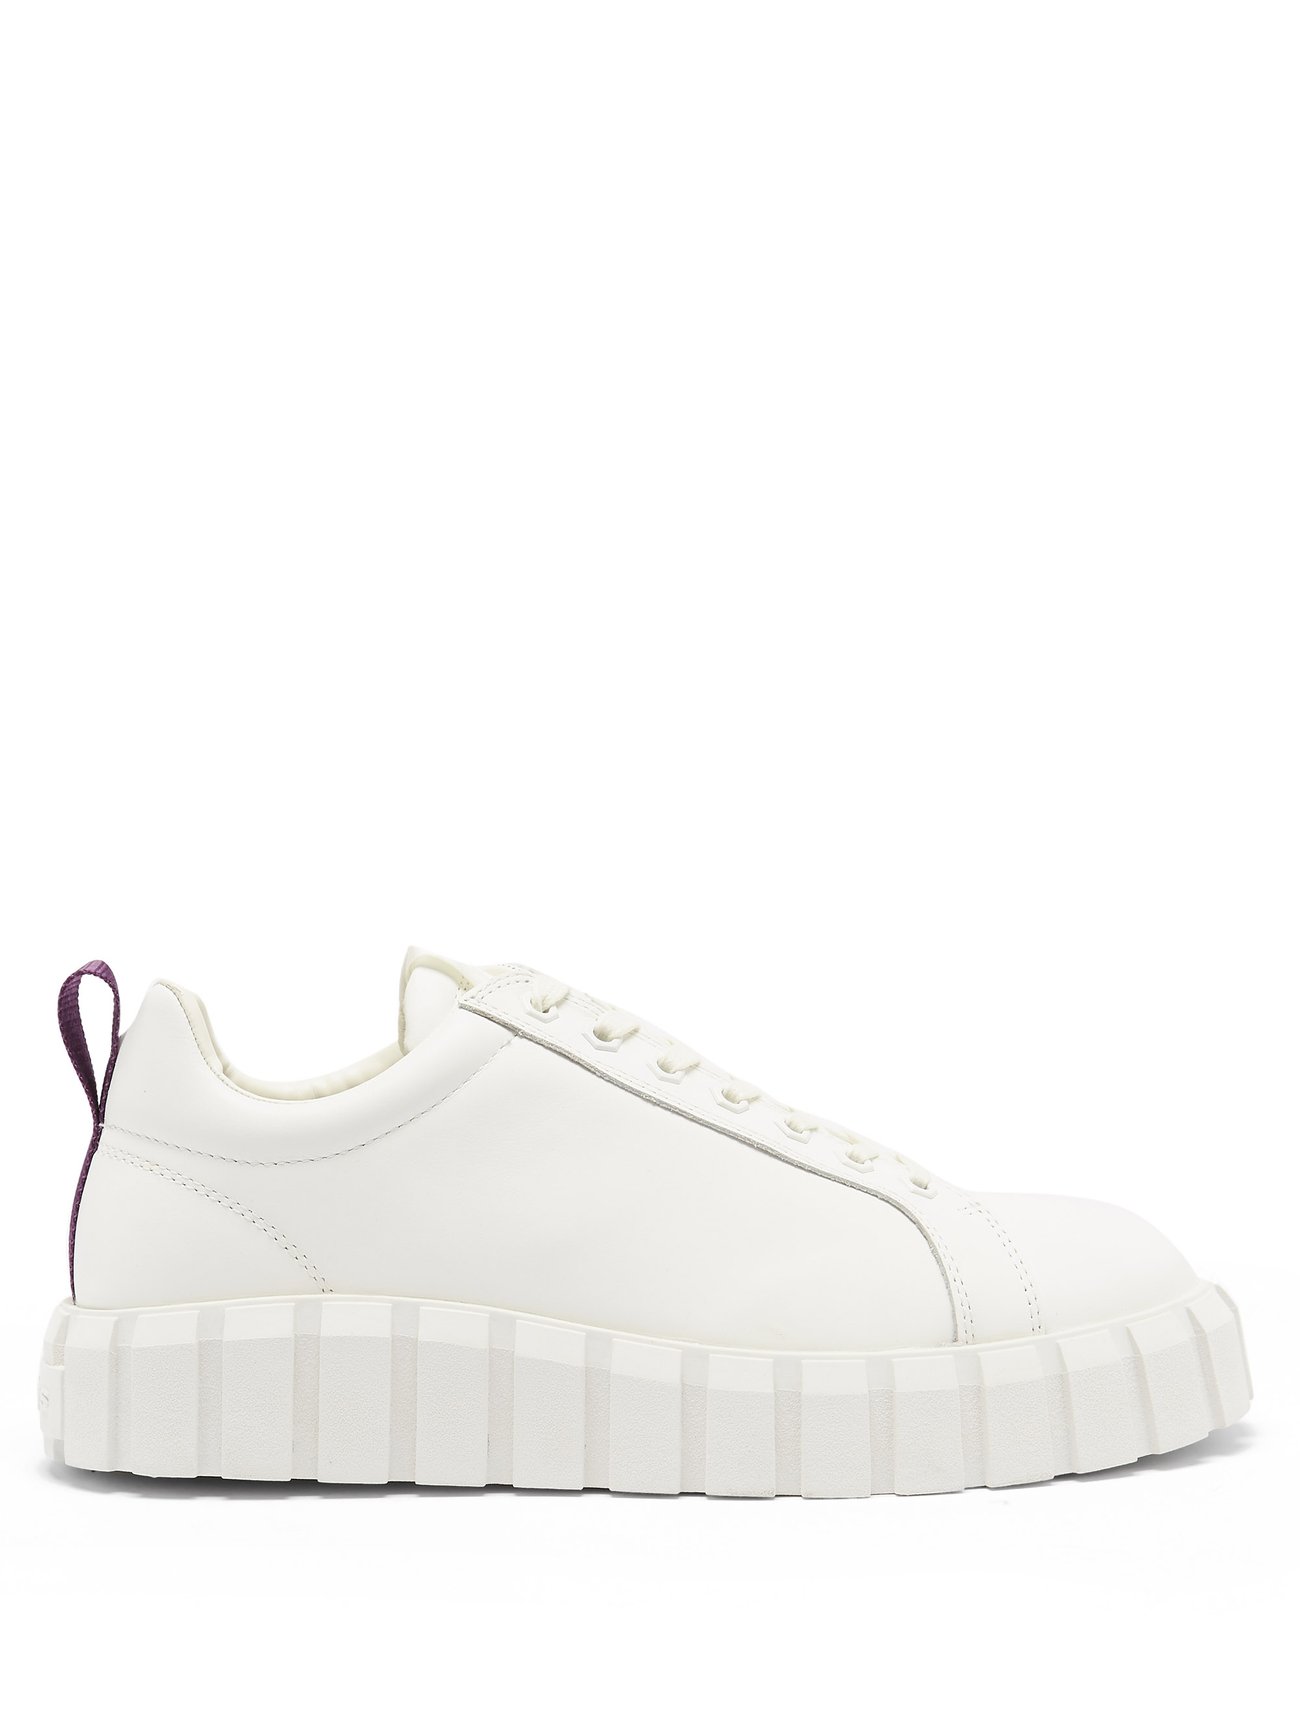 undefined | EYTYS Odessa rib-sole leather trainers